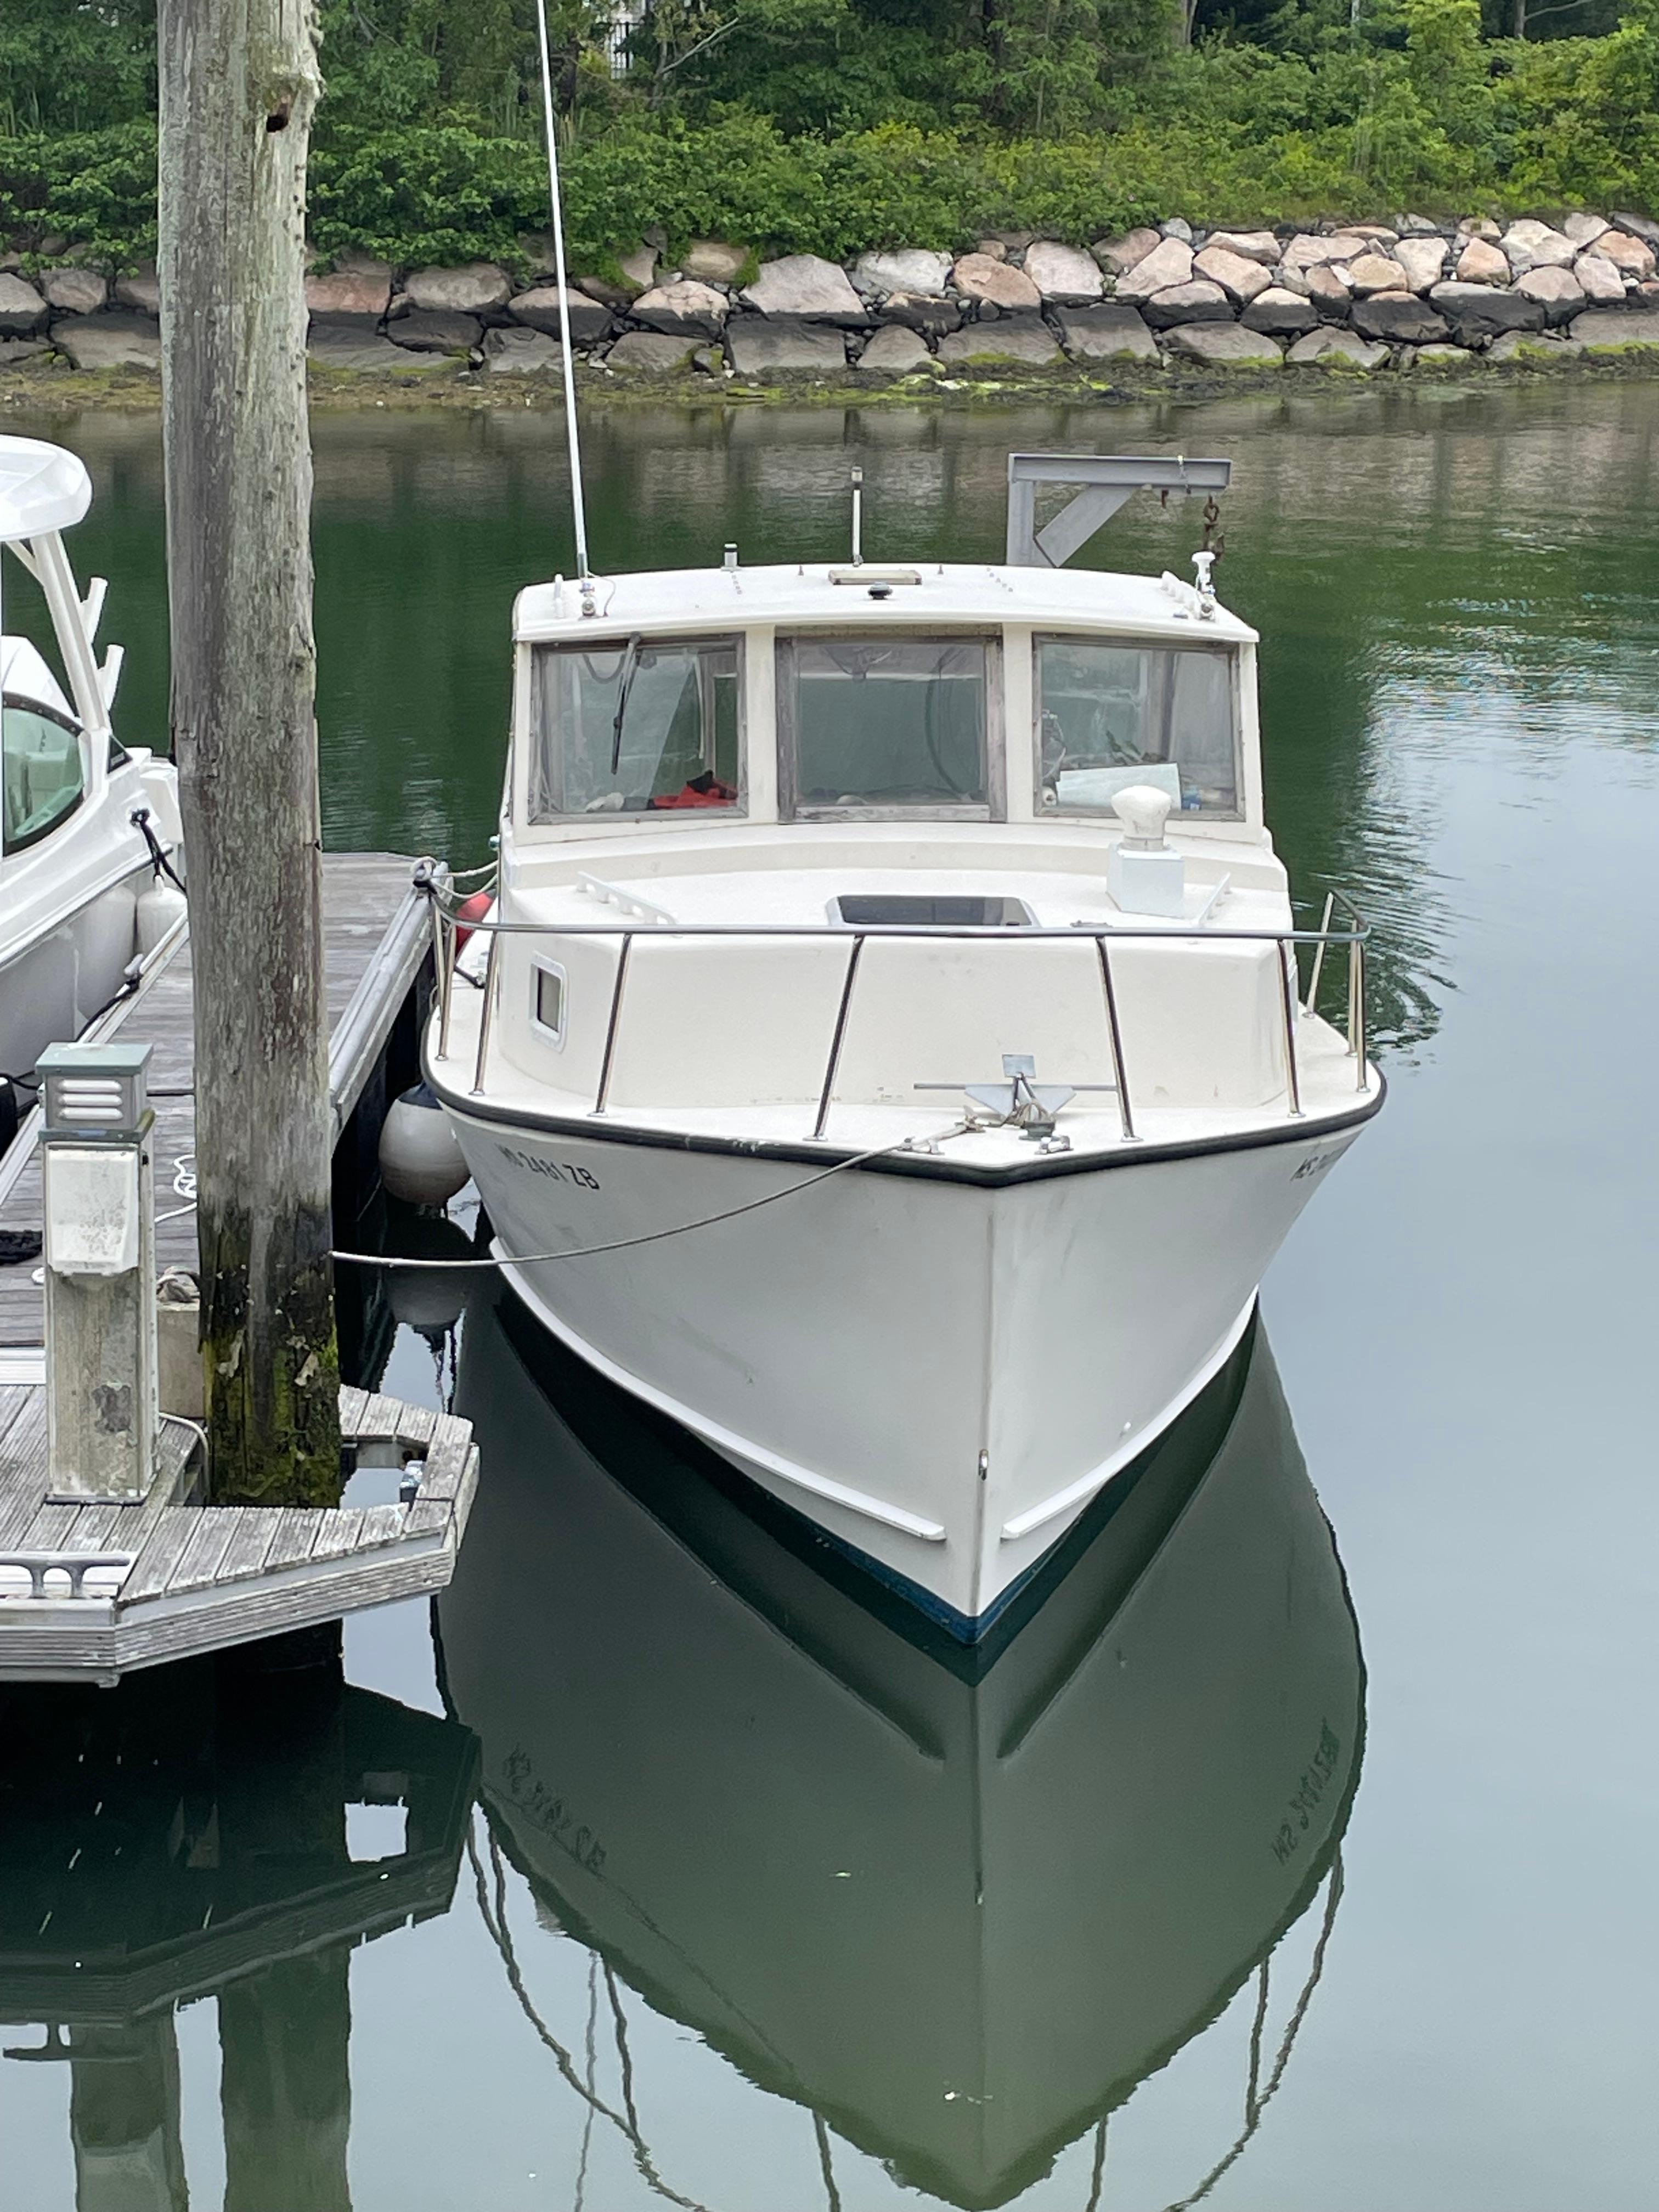 Commercial boats for sale - 5 of 5 pages - Boat Trader